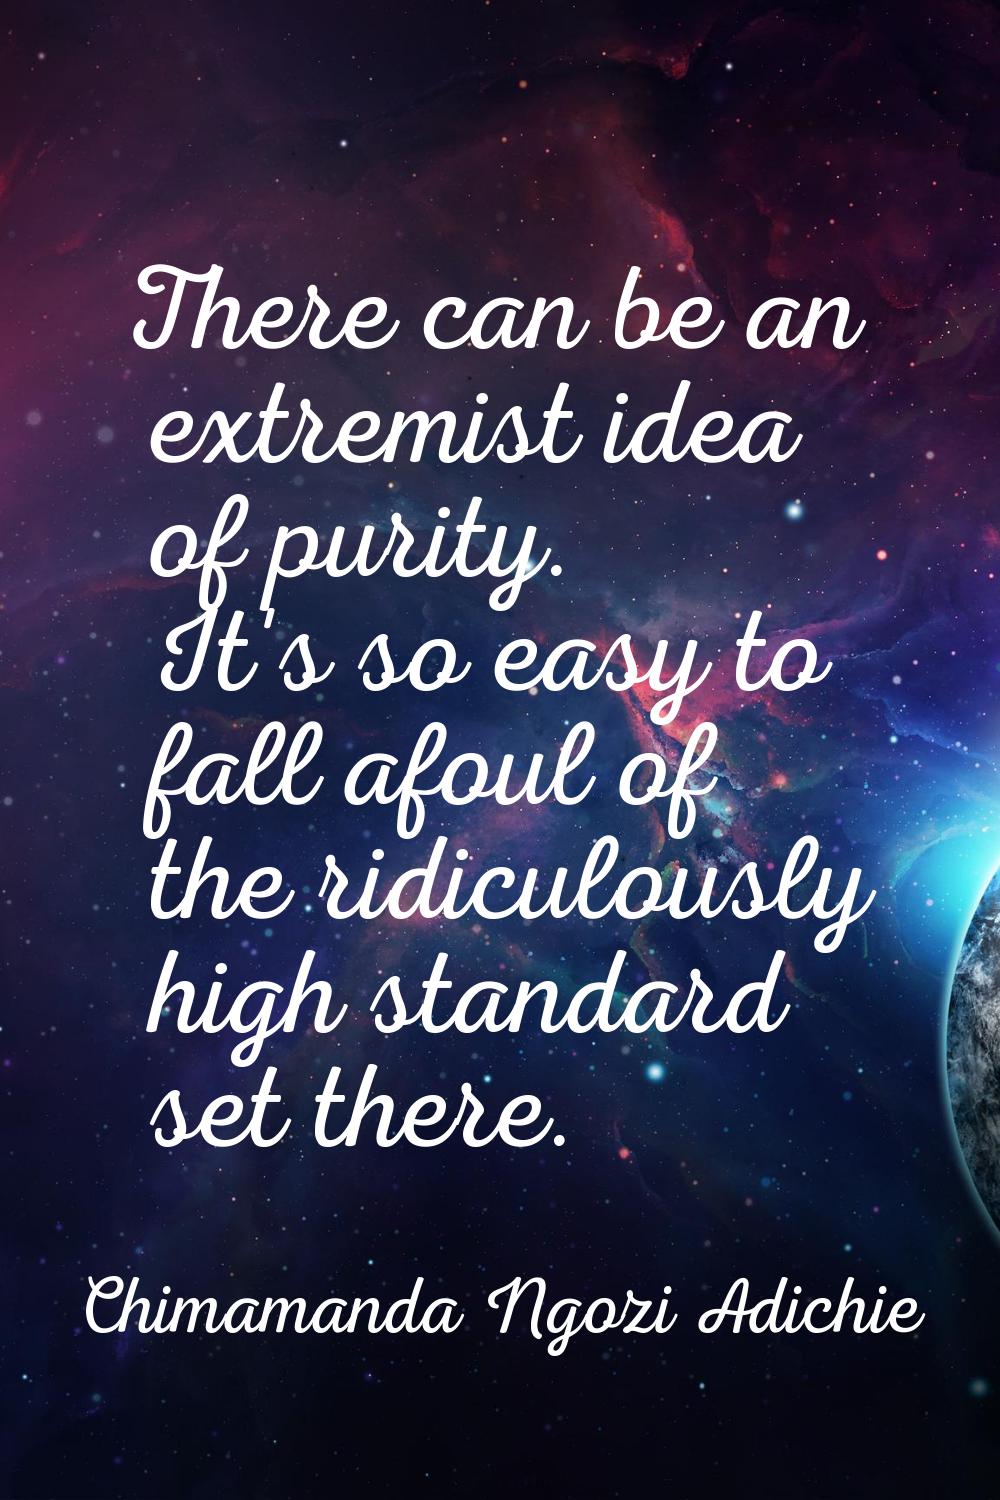 There can be an extremist idea of purity. It's so easy to fall afoul of the ridiculously high stand